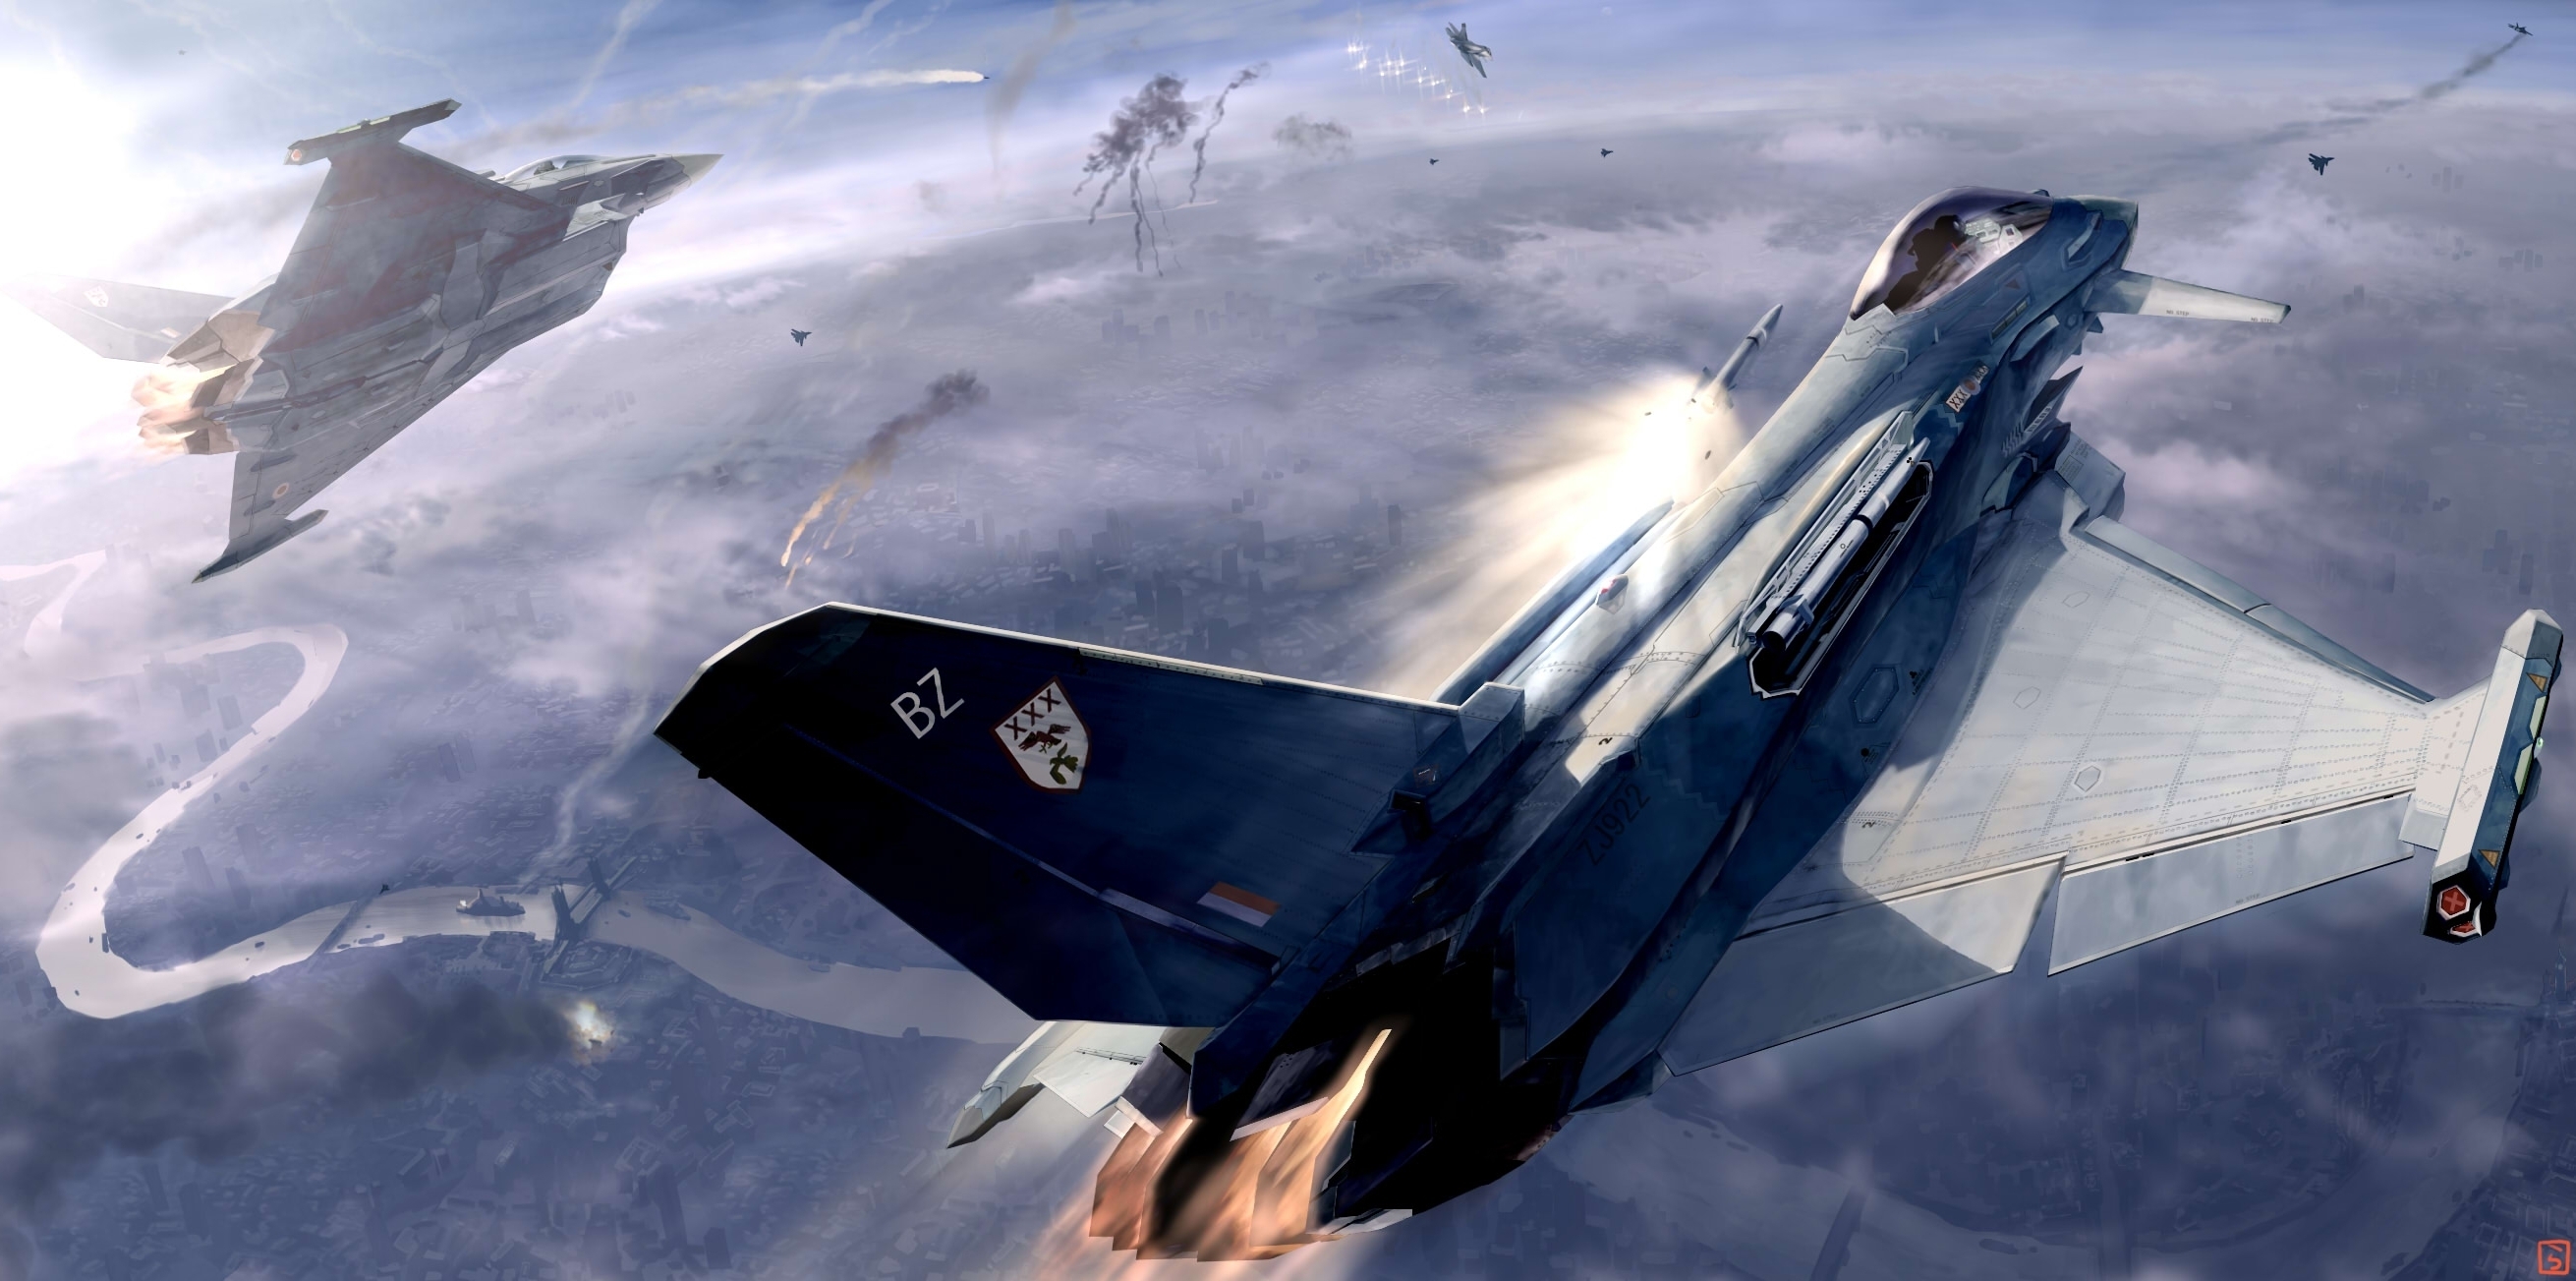 ace combat wallpaper,airplane,aircraft,vehicle,military aircraft,fighter aircraft